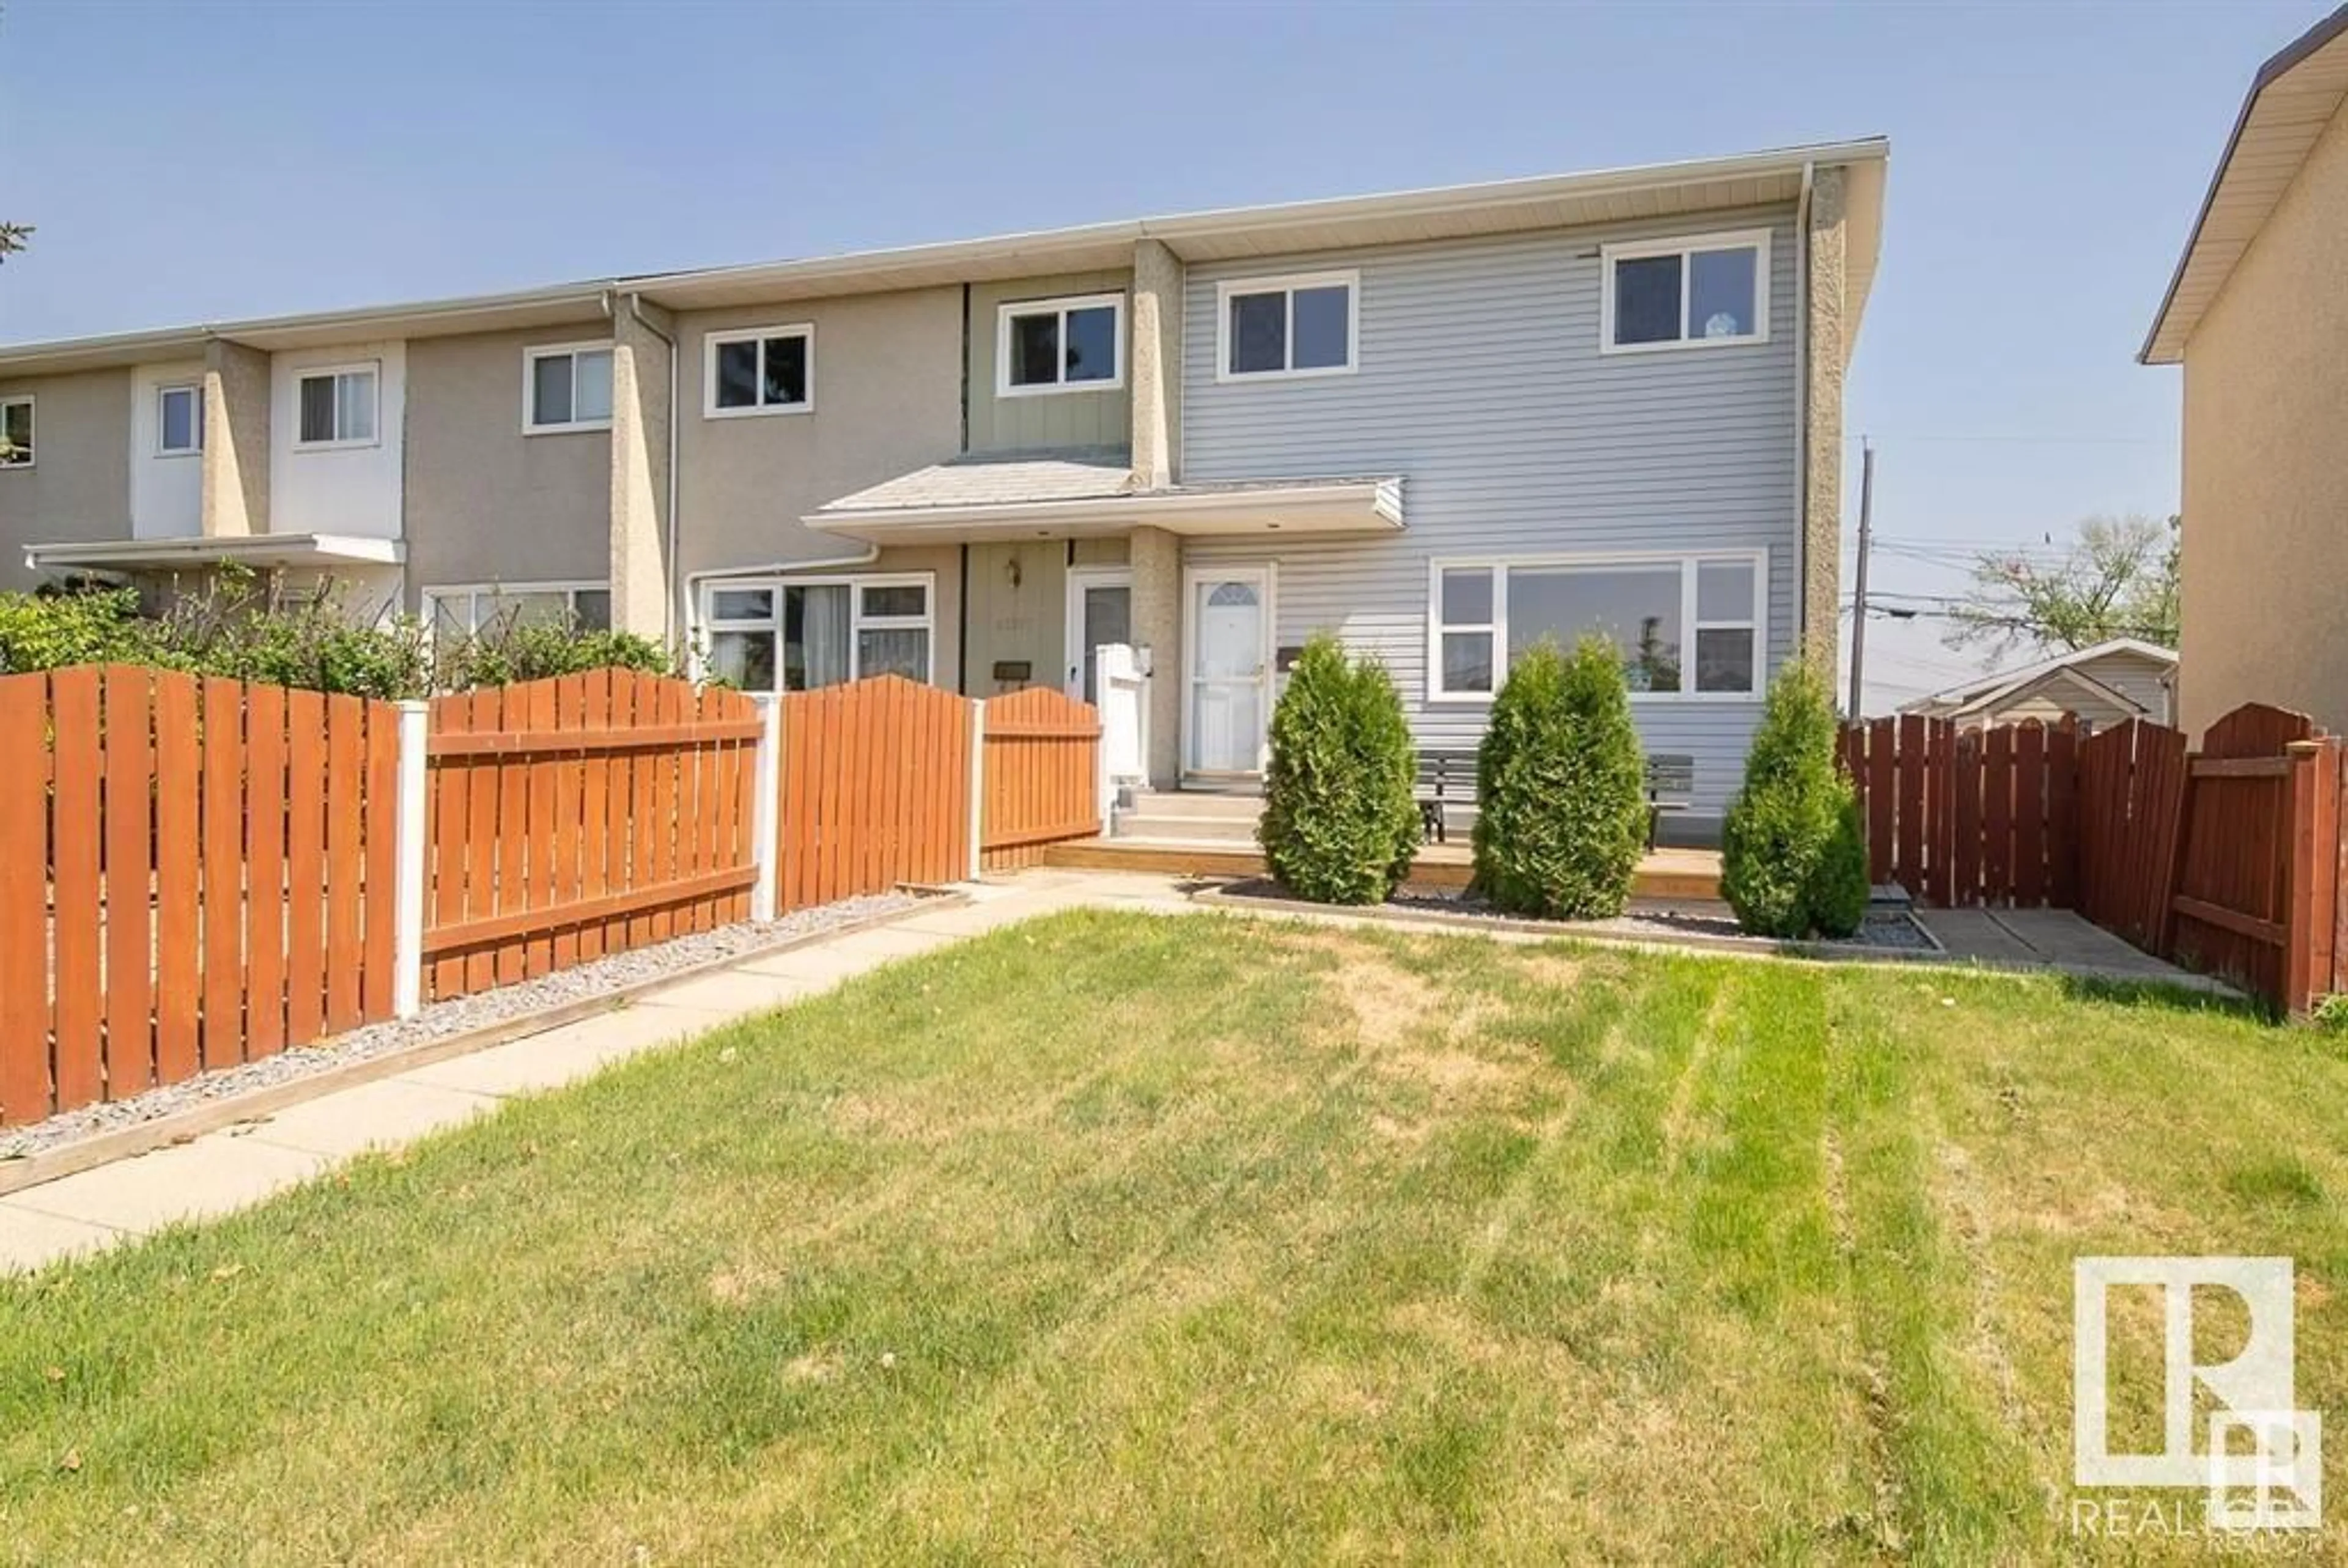 A pic from exterior of the house or condo for 13315 85 ST NW, Edmonton Alberta T5E2Z8